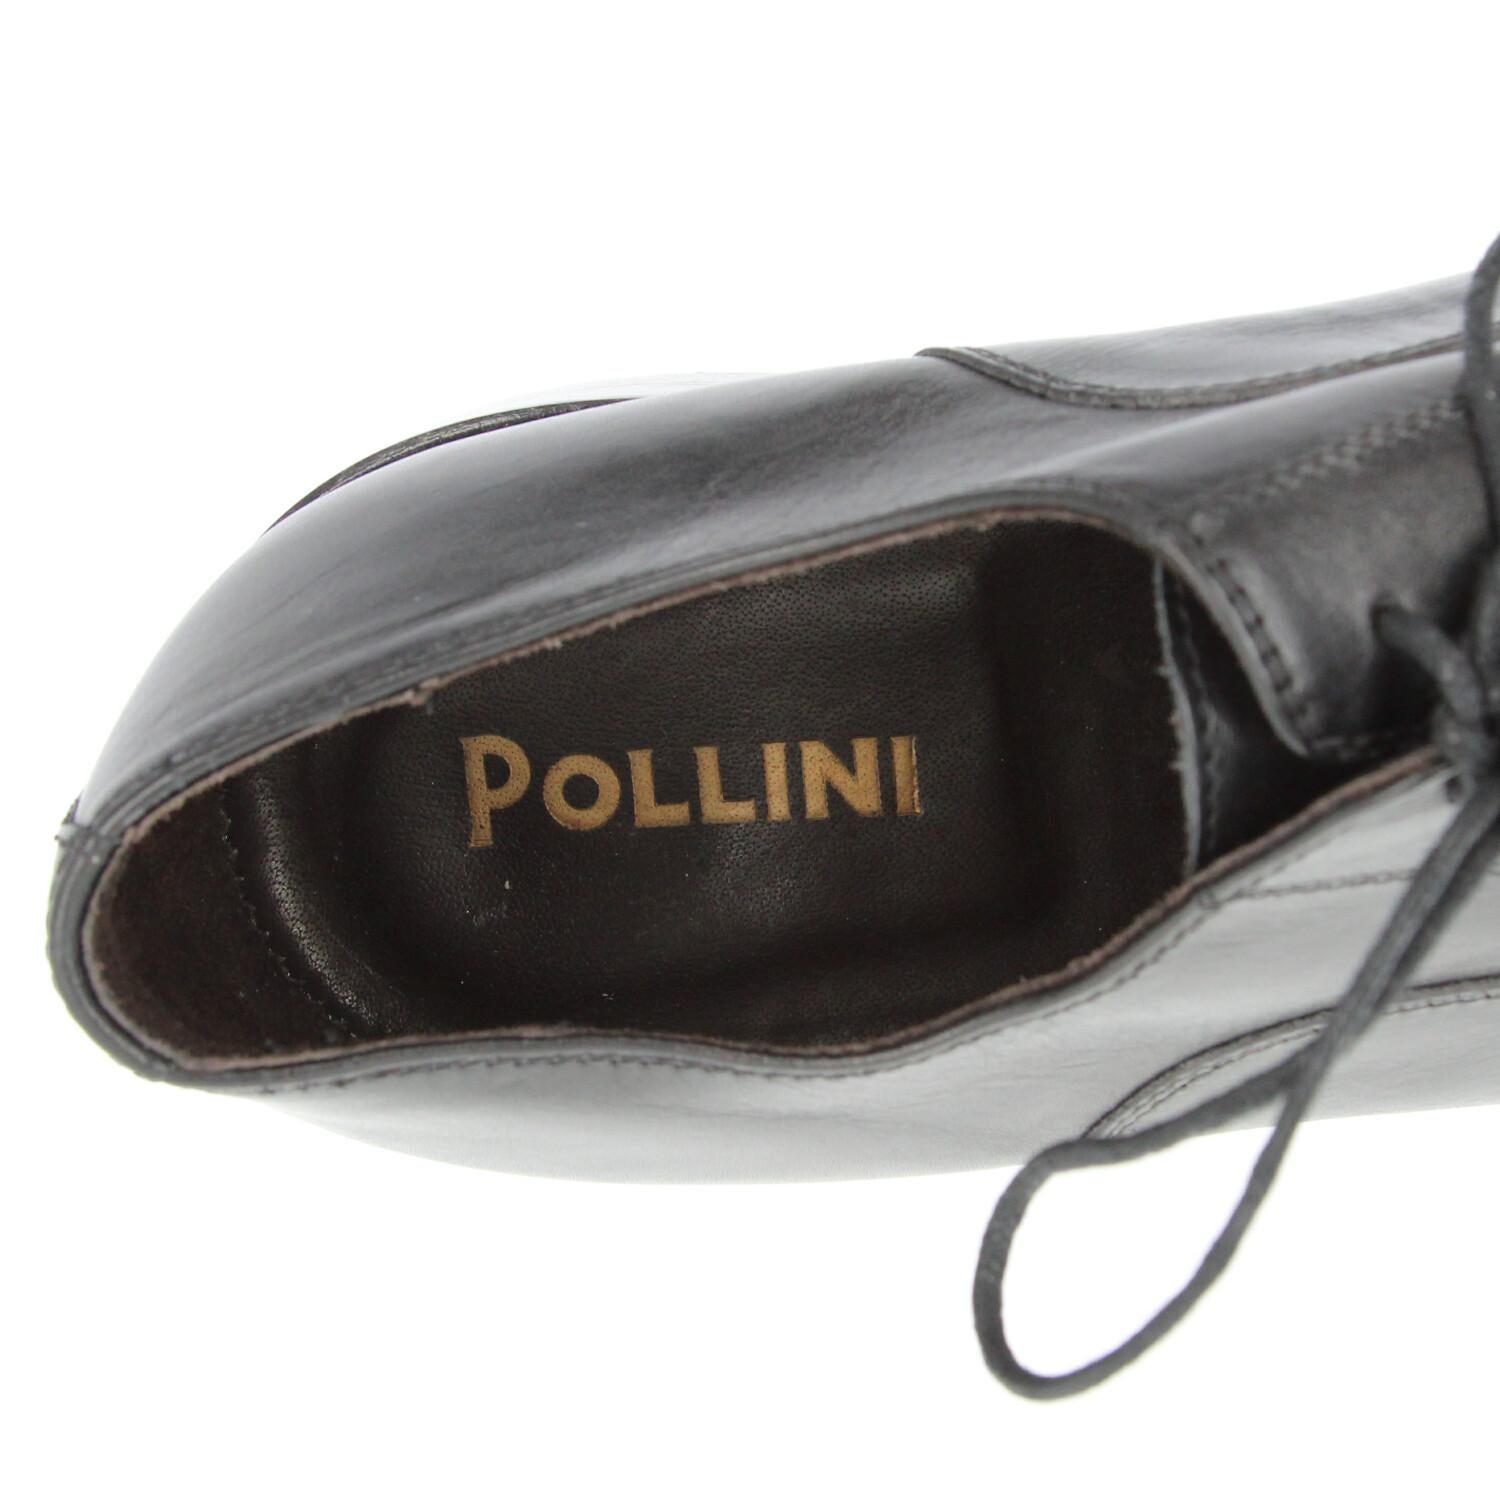 2000s Pollini Black Leather Oxford Shoes 5